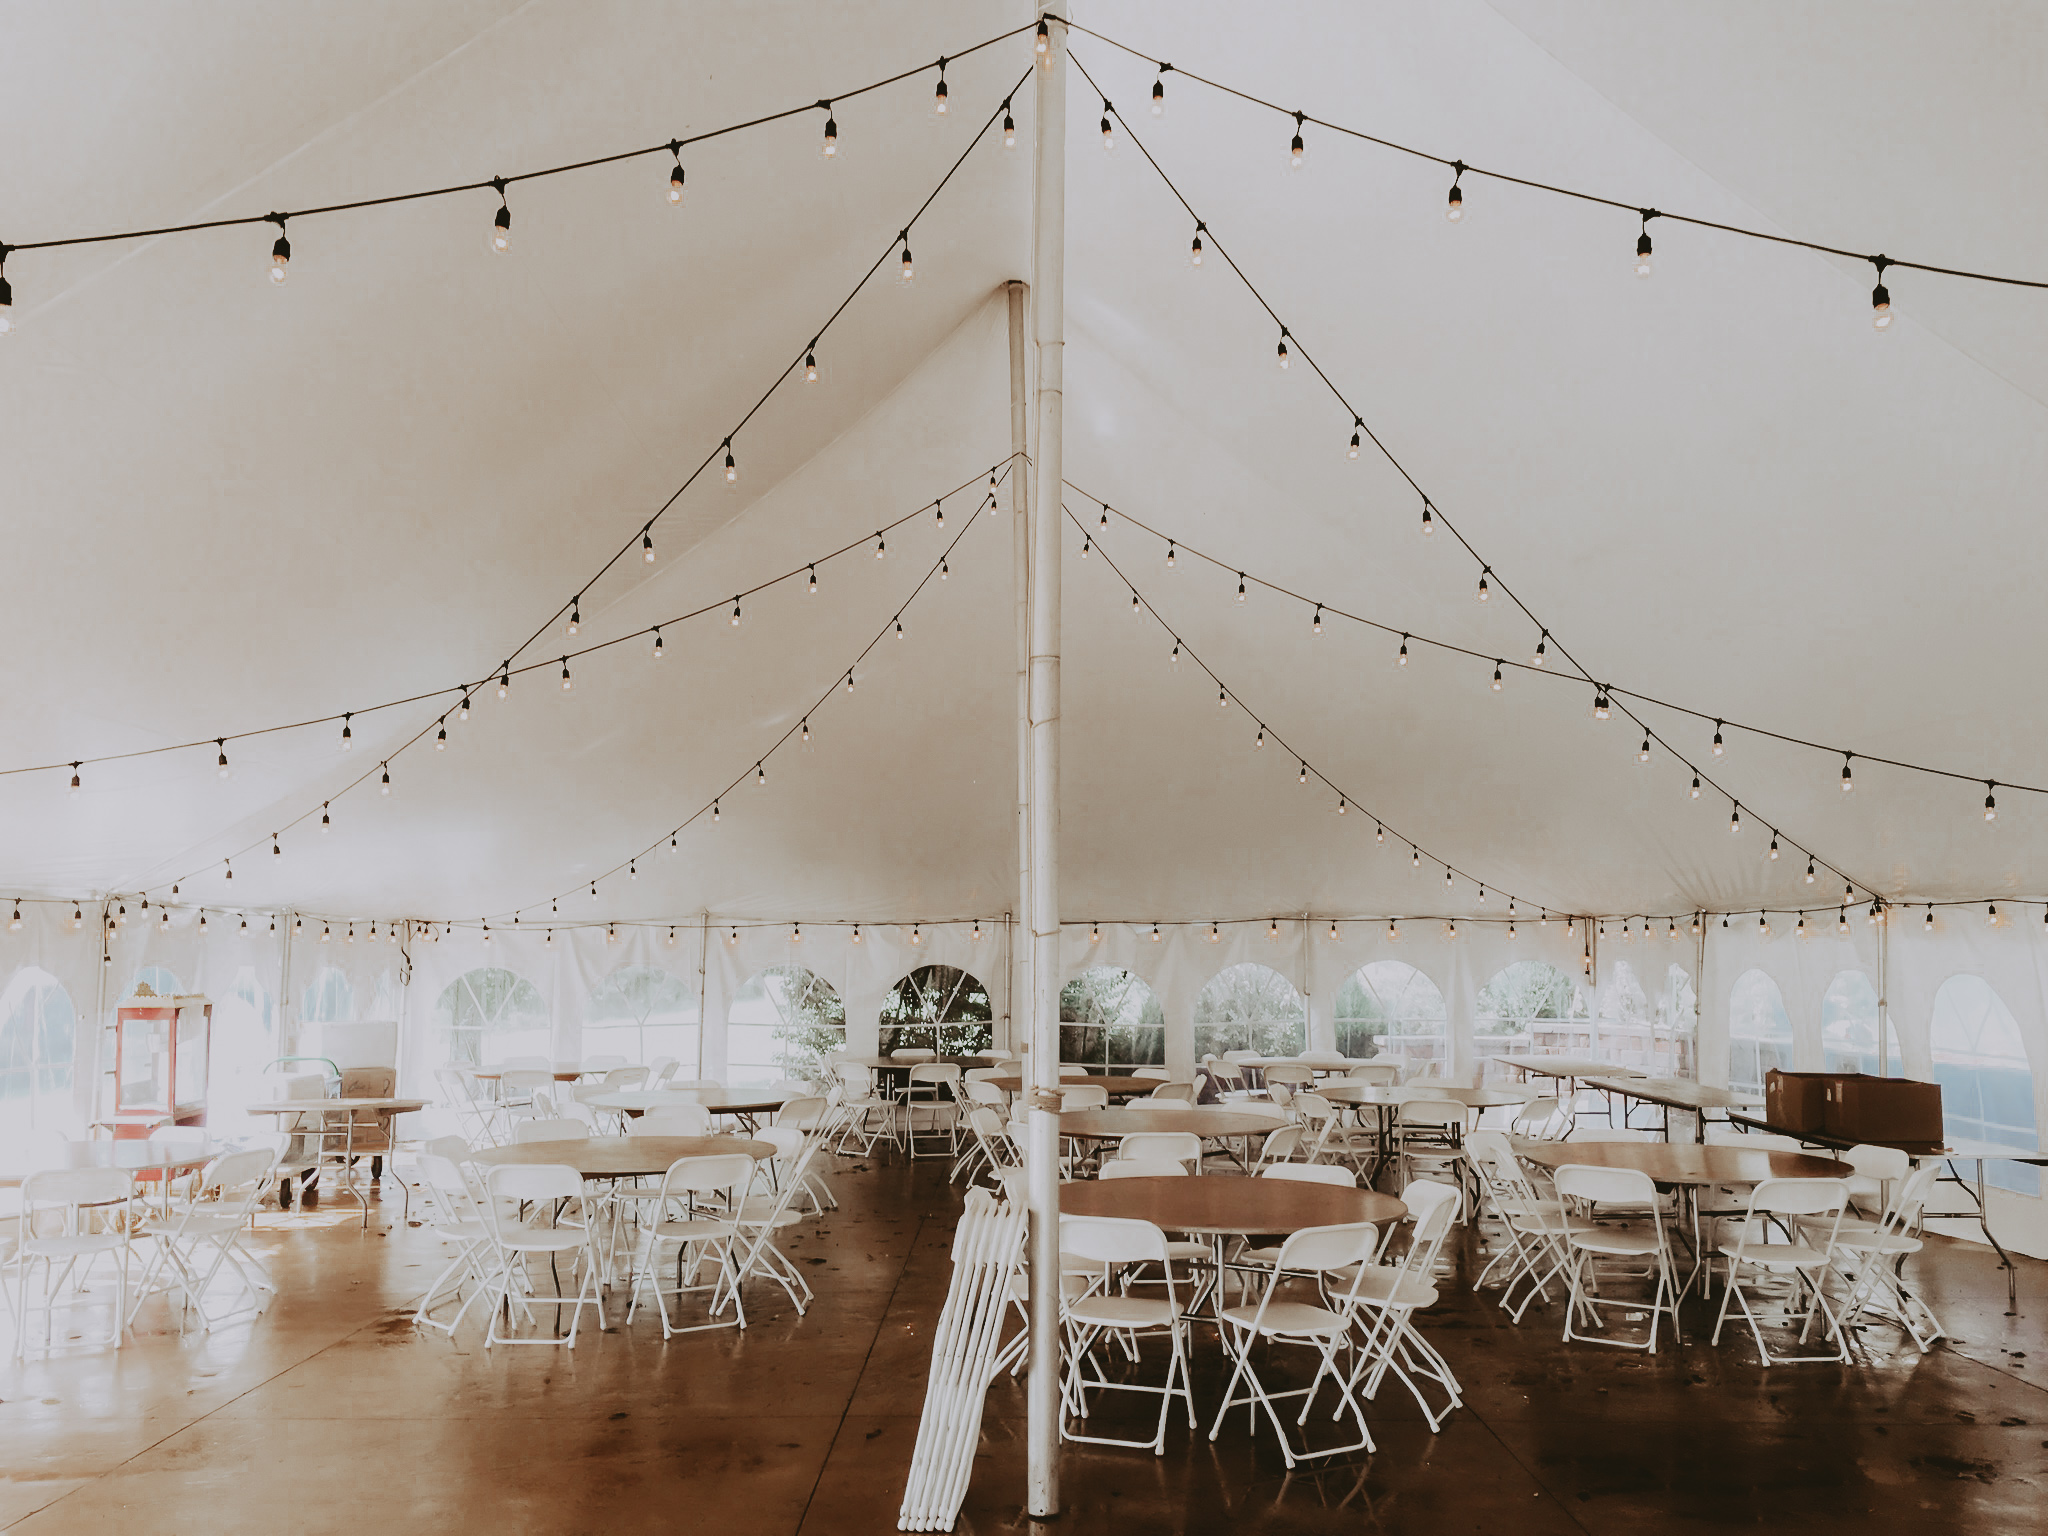 https://bigtentevents.com/wp-content/uploads/40-x-60-rope-and-pole-tent-with-cafe-lights-tables-chairs-and-popcorn-machine.jpg